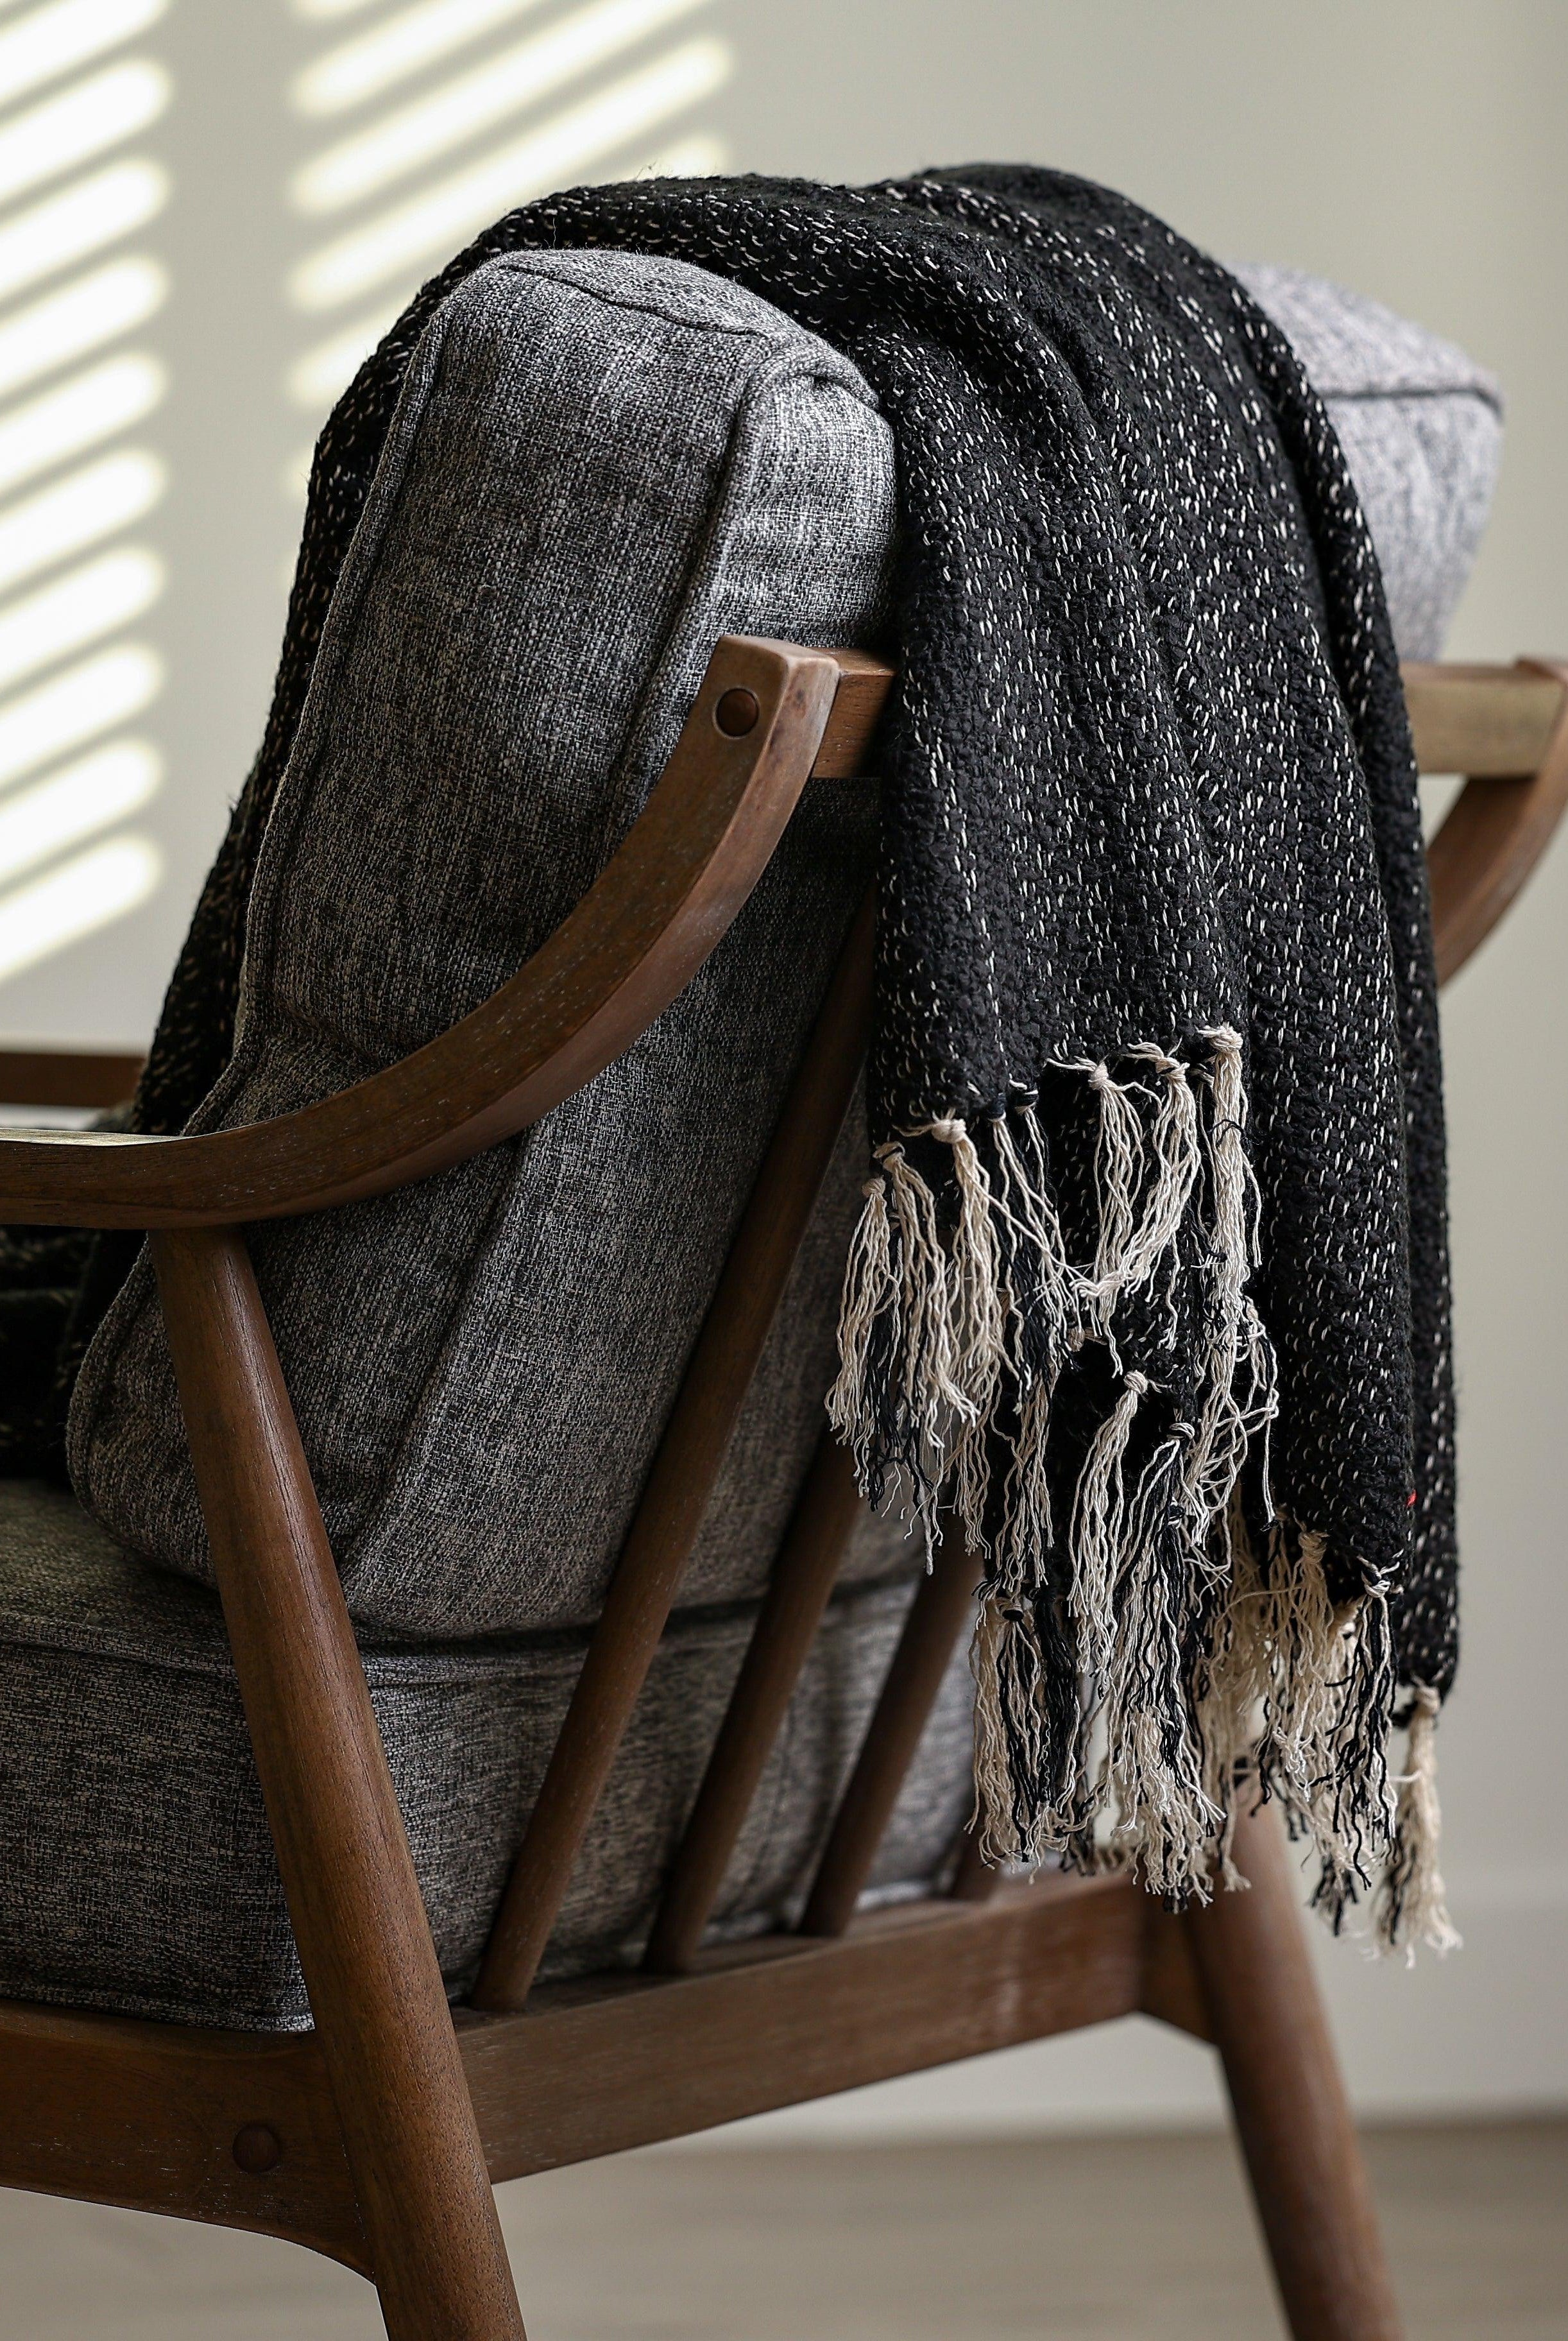 VERY SOFT THROW BLANKET WHITH SUBTLE STRIPES - Boucle Home